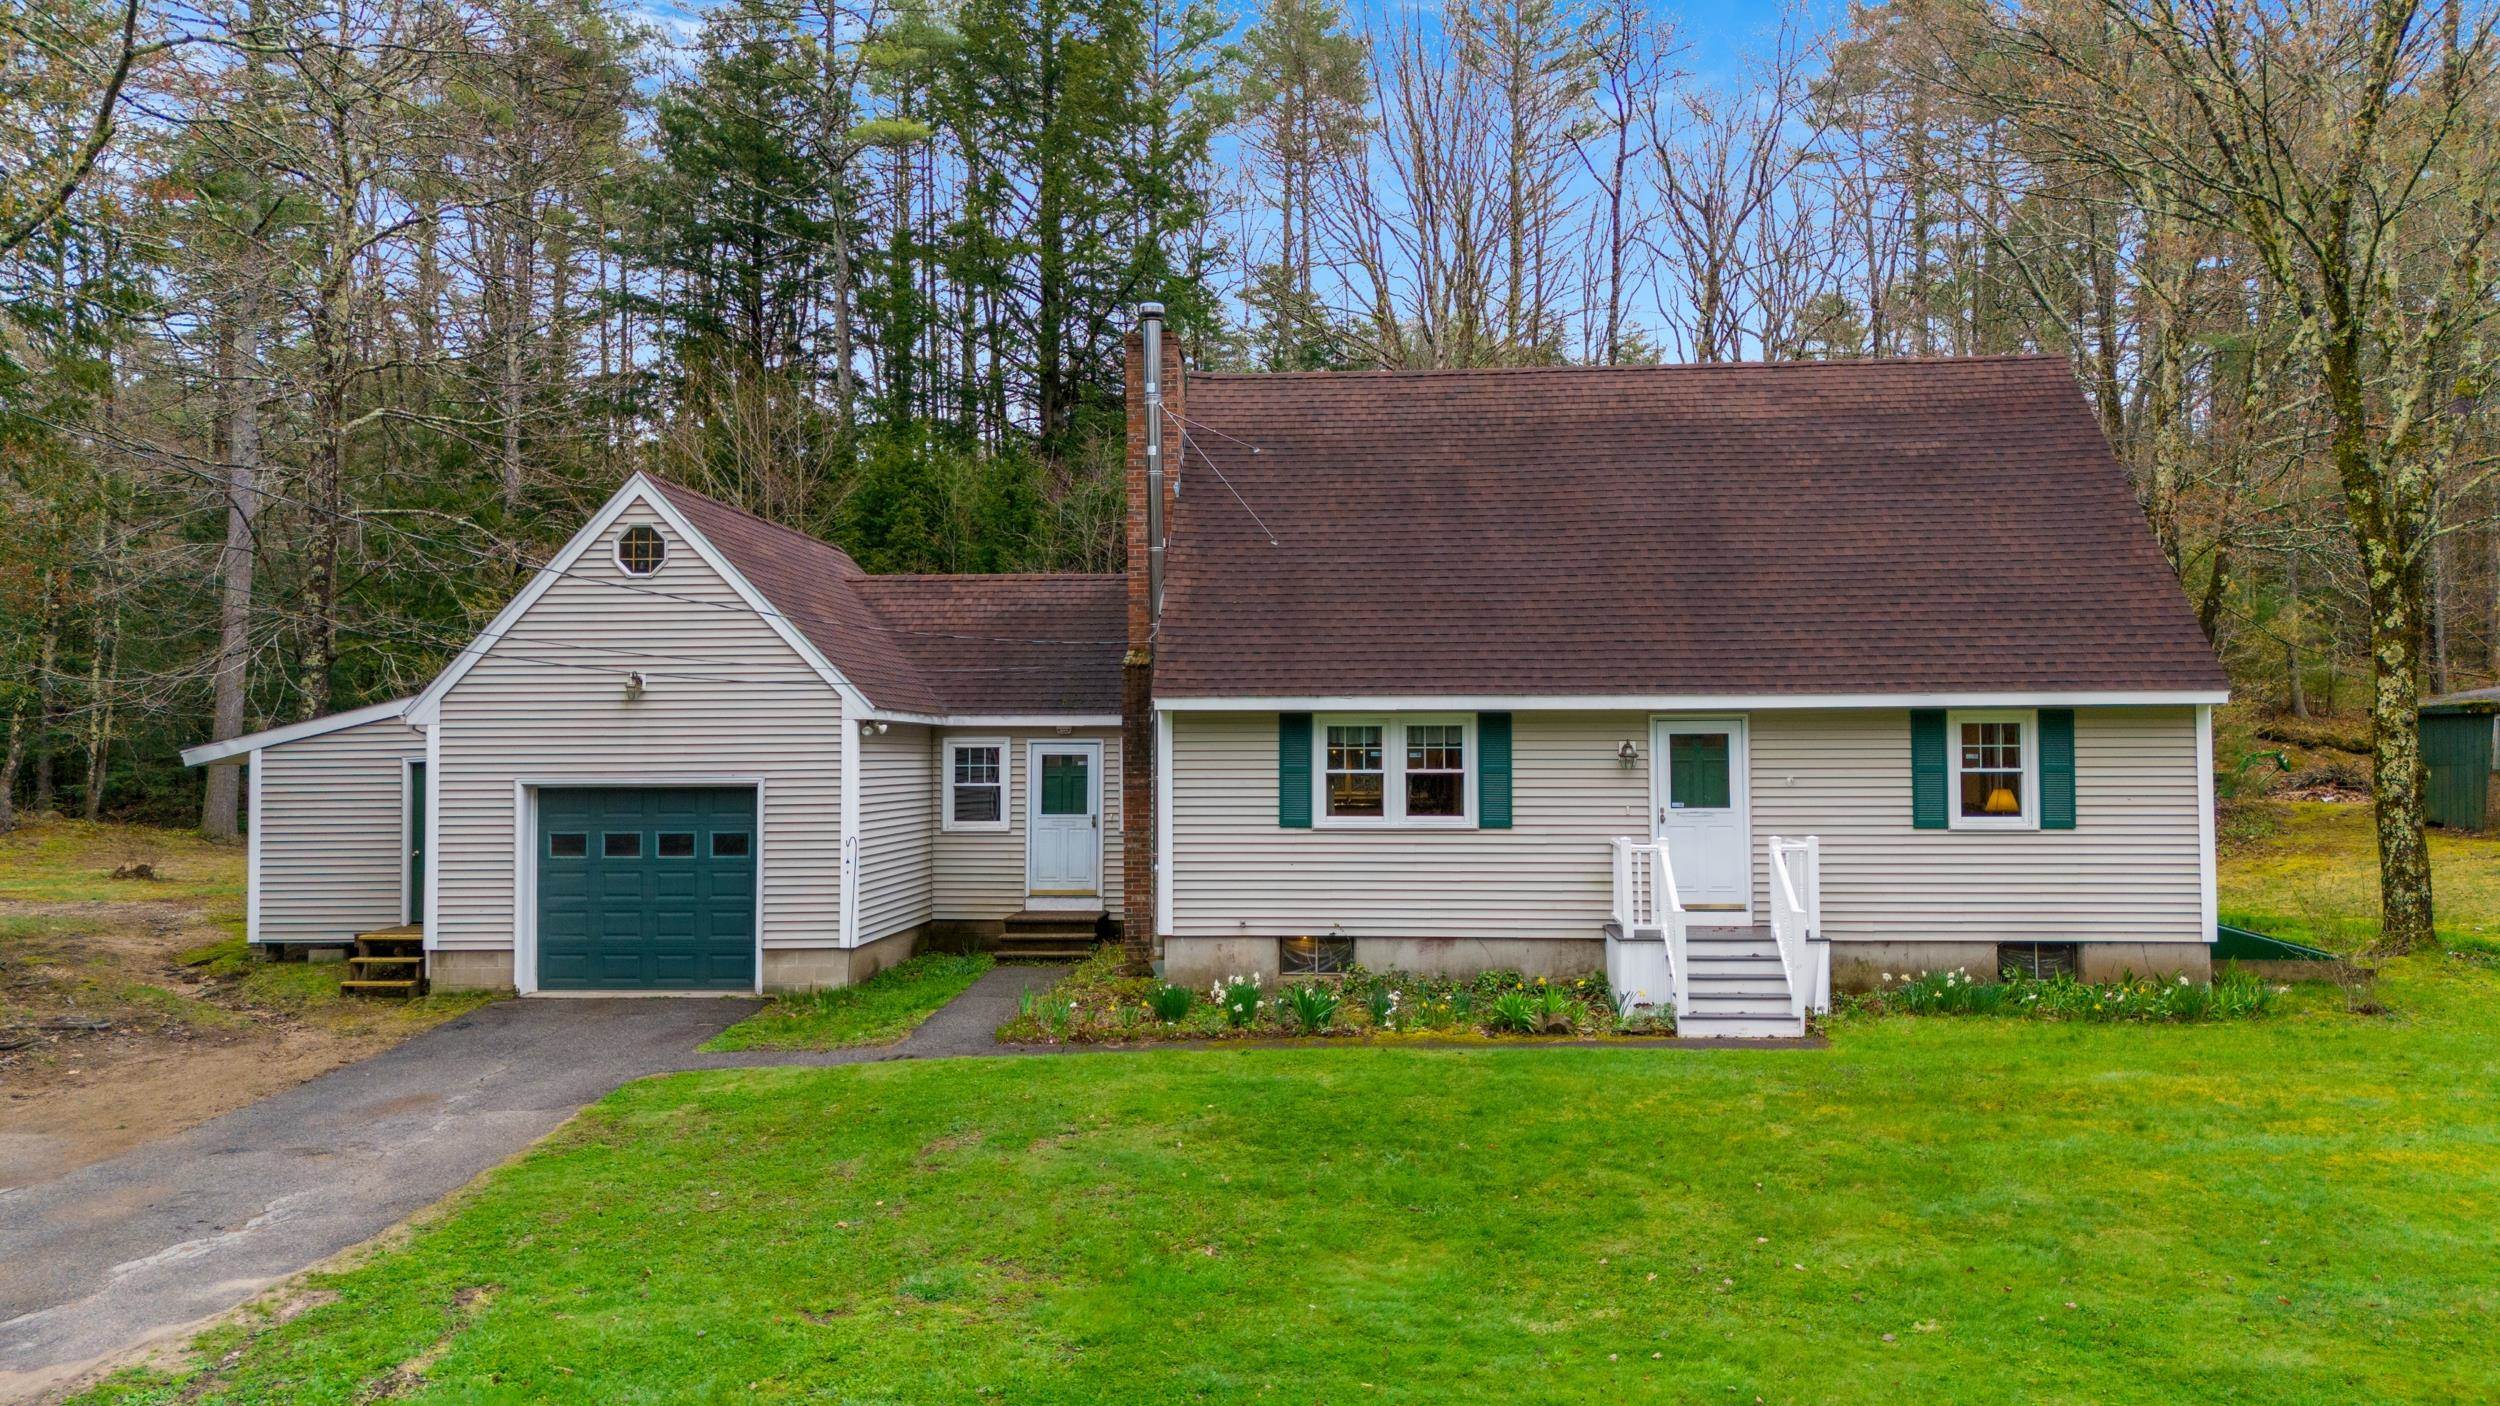 MLS 4994898: 51 Shepard Home Road, Chester NH